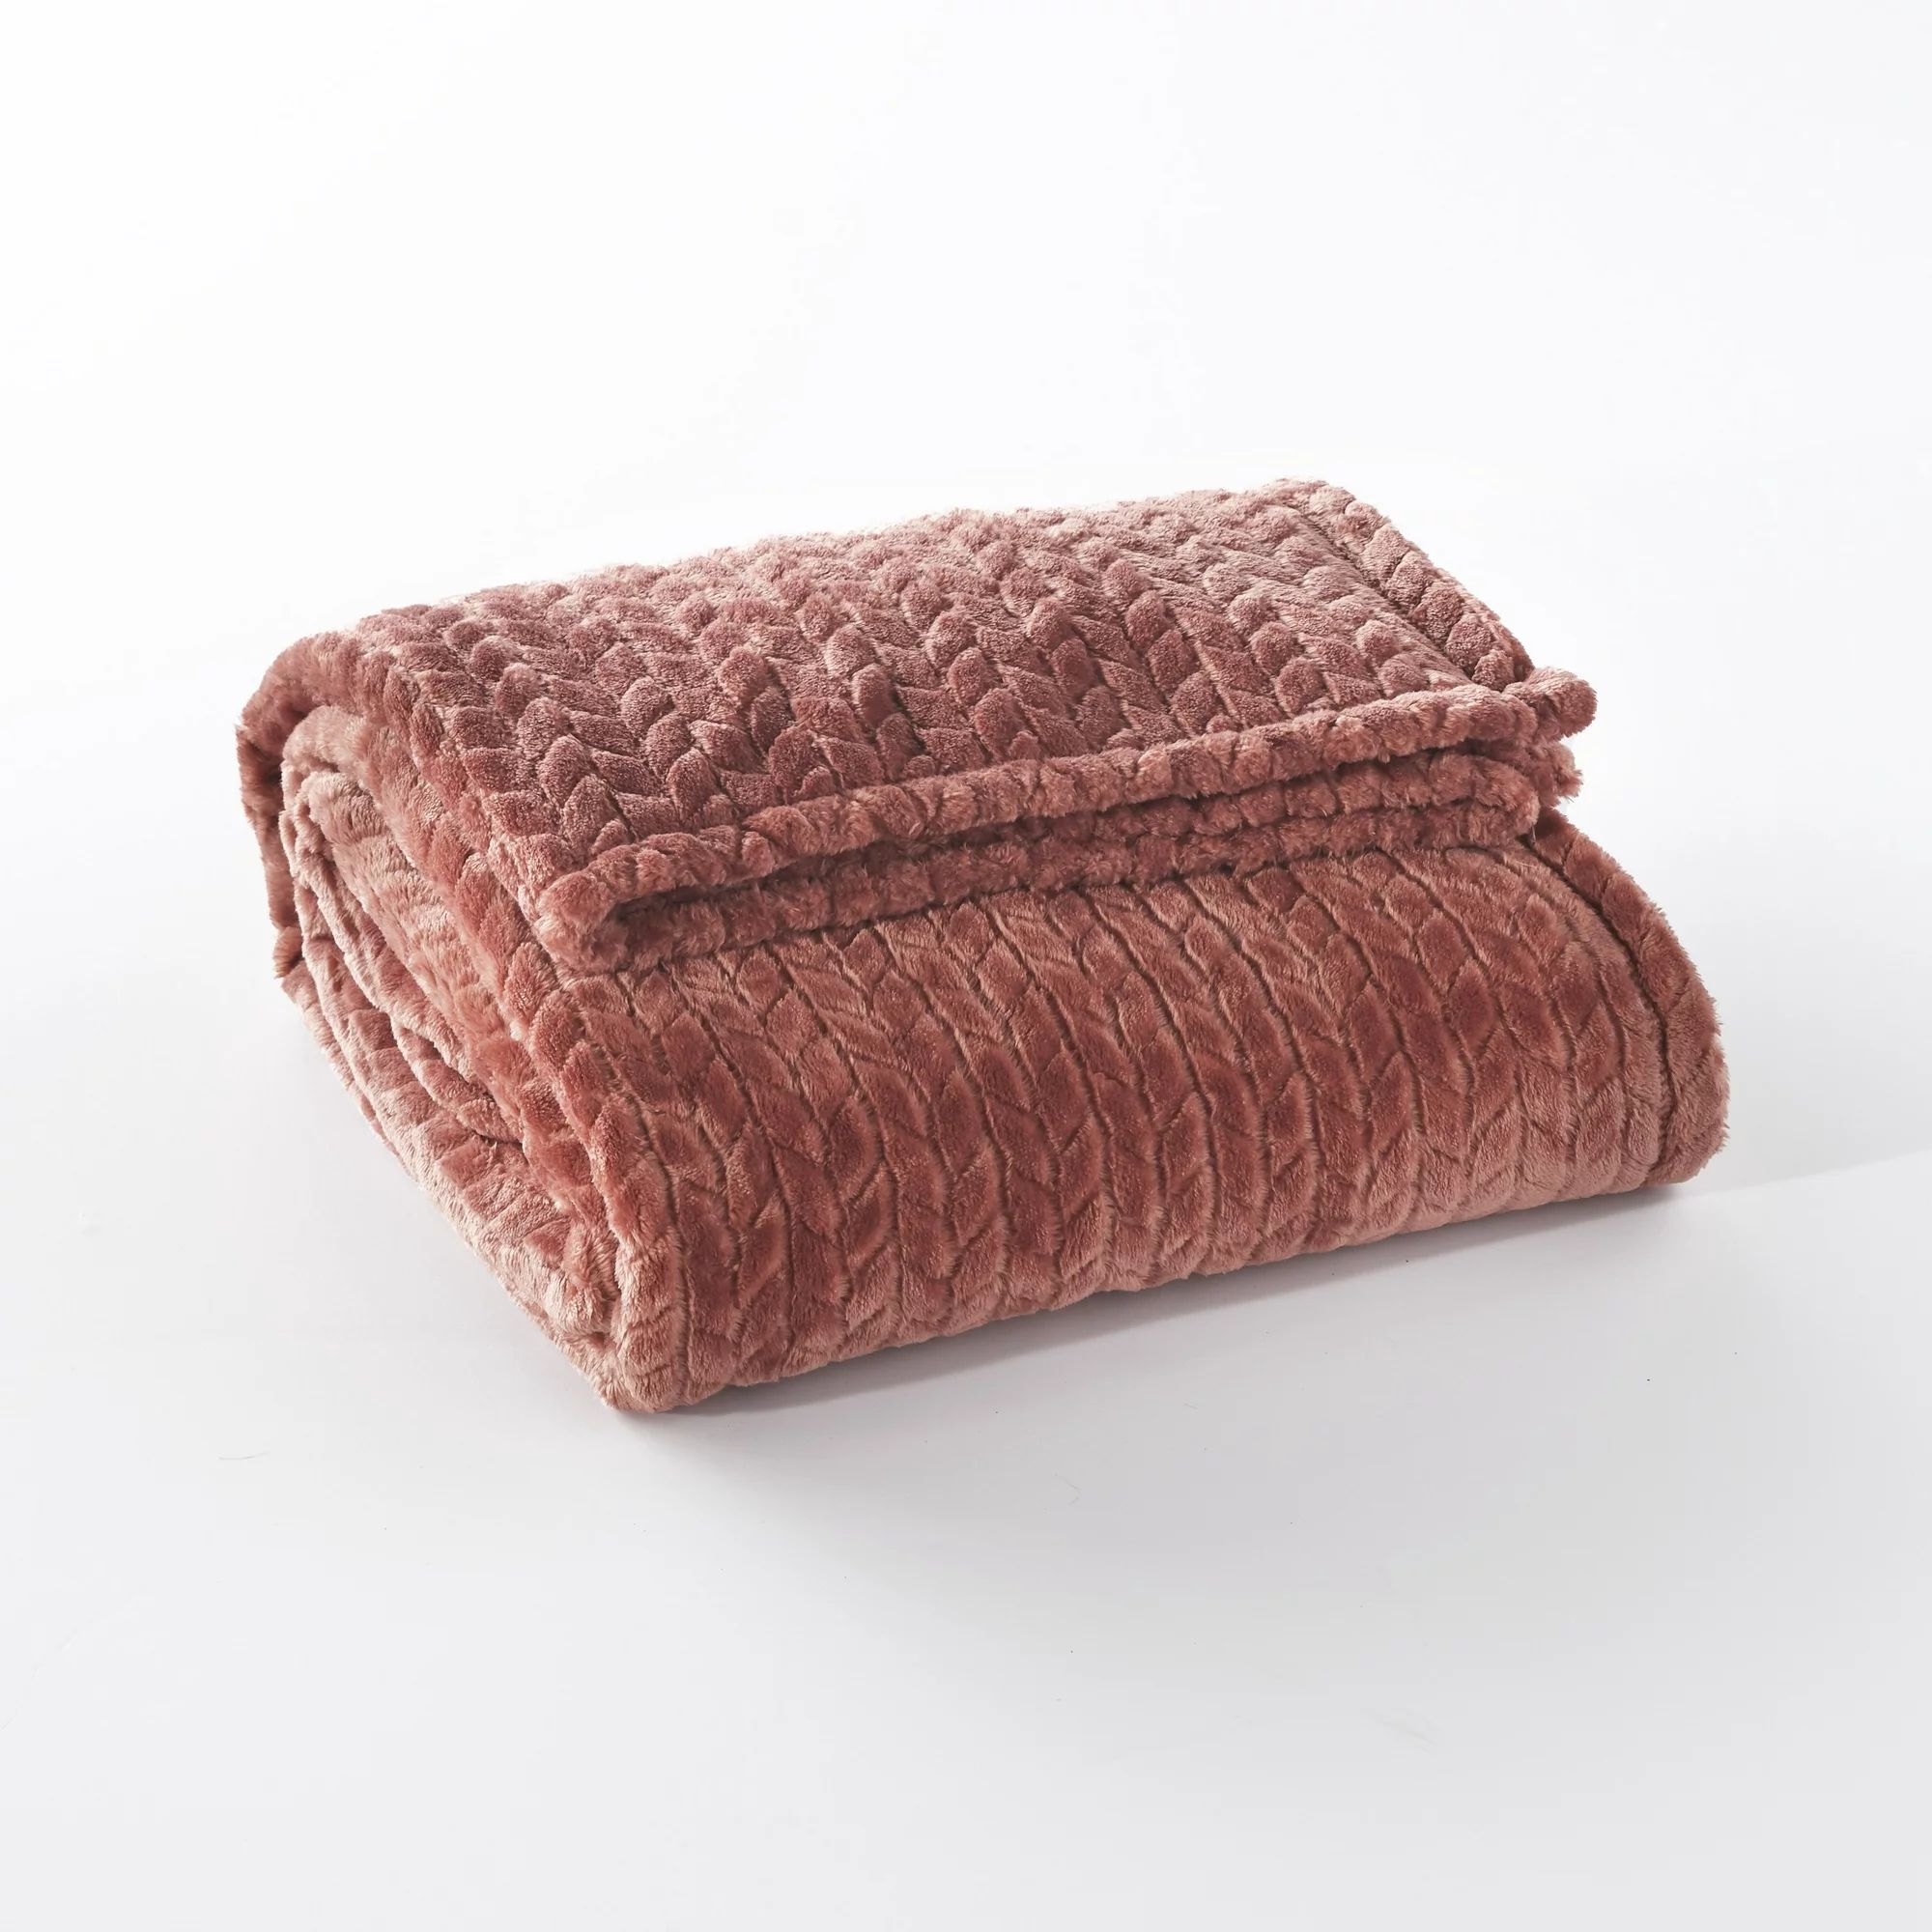 Woven Textured Plush Throw Blanket for the Couch or Bedroom | Walmart (US)